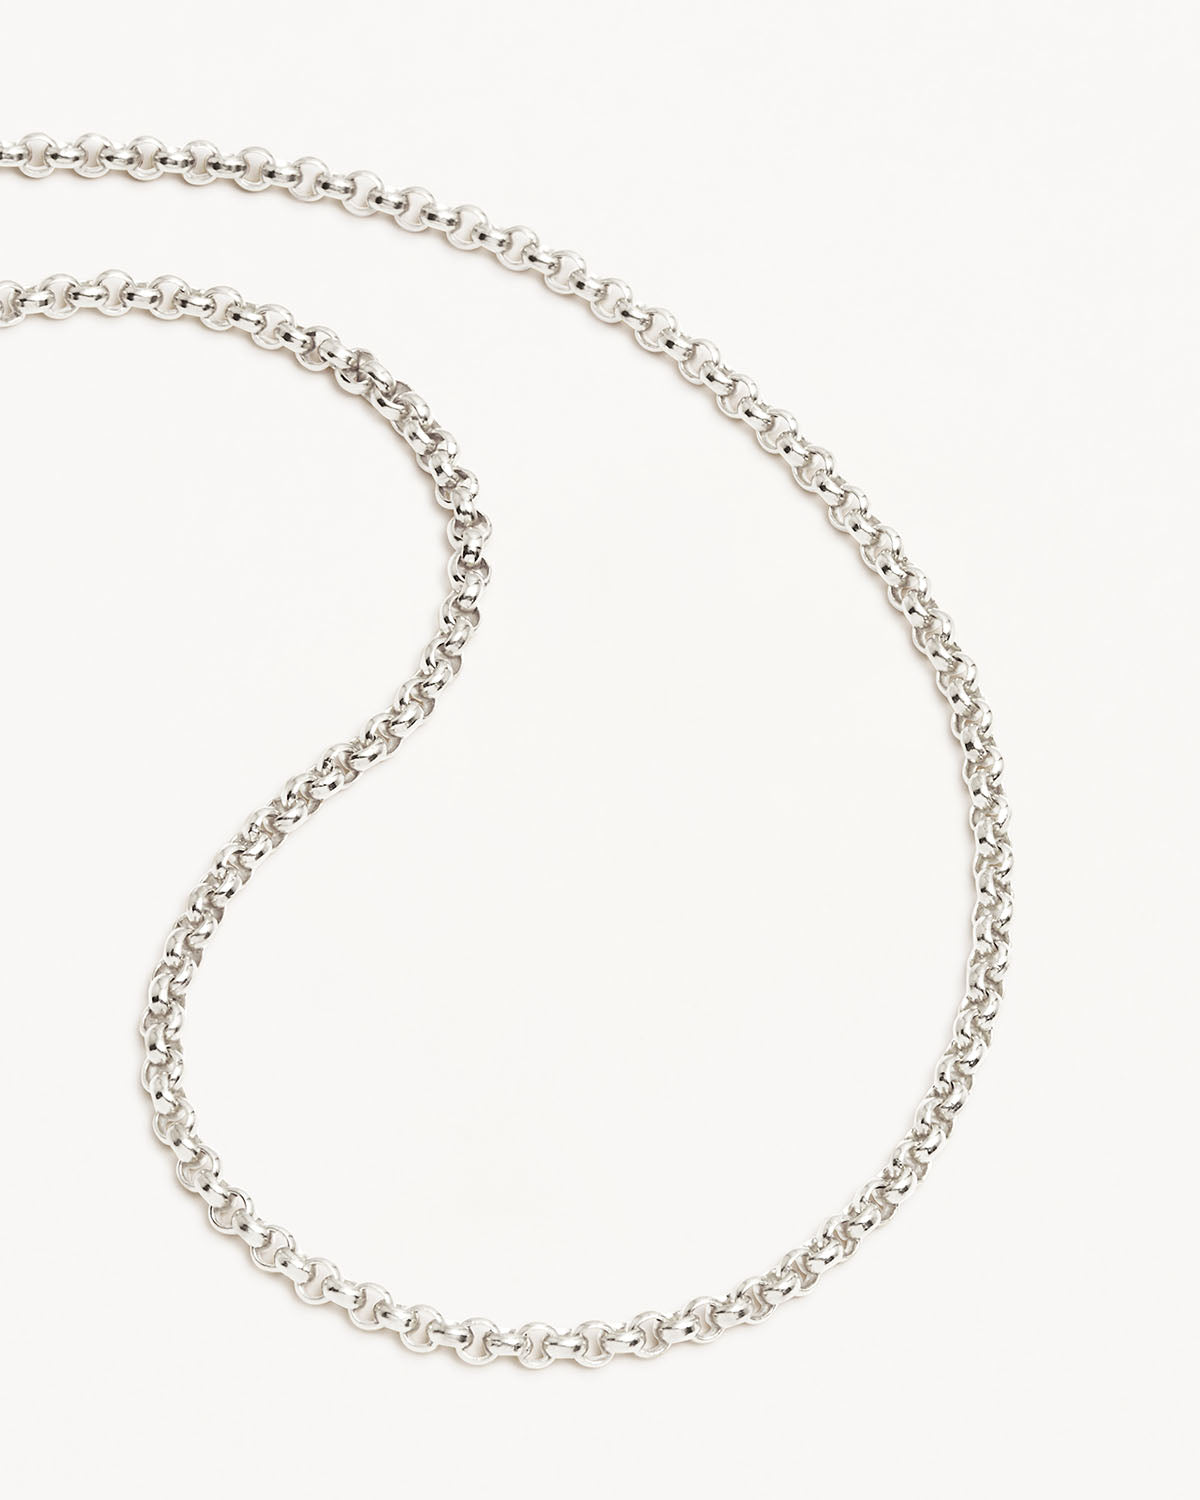 22 Inch sterlng silver belcher chain necklace .925 x1 Chains Necklaces